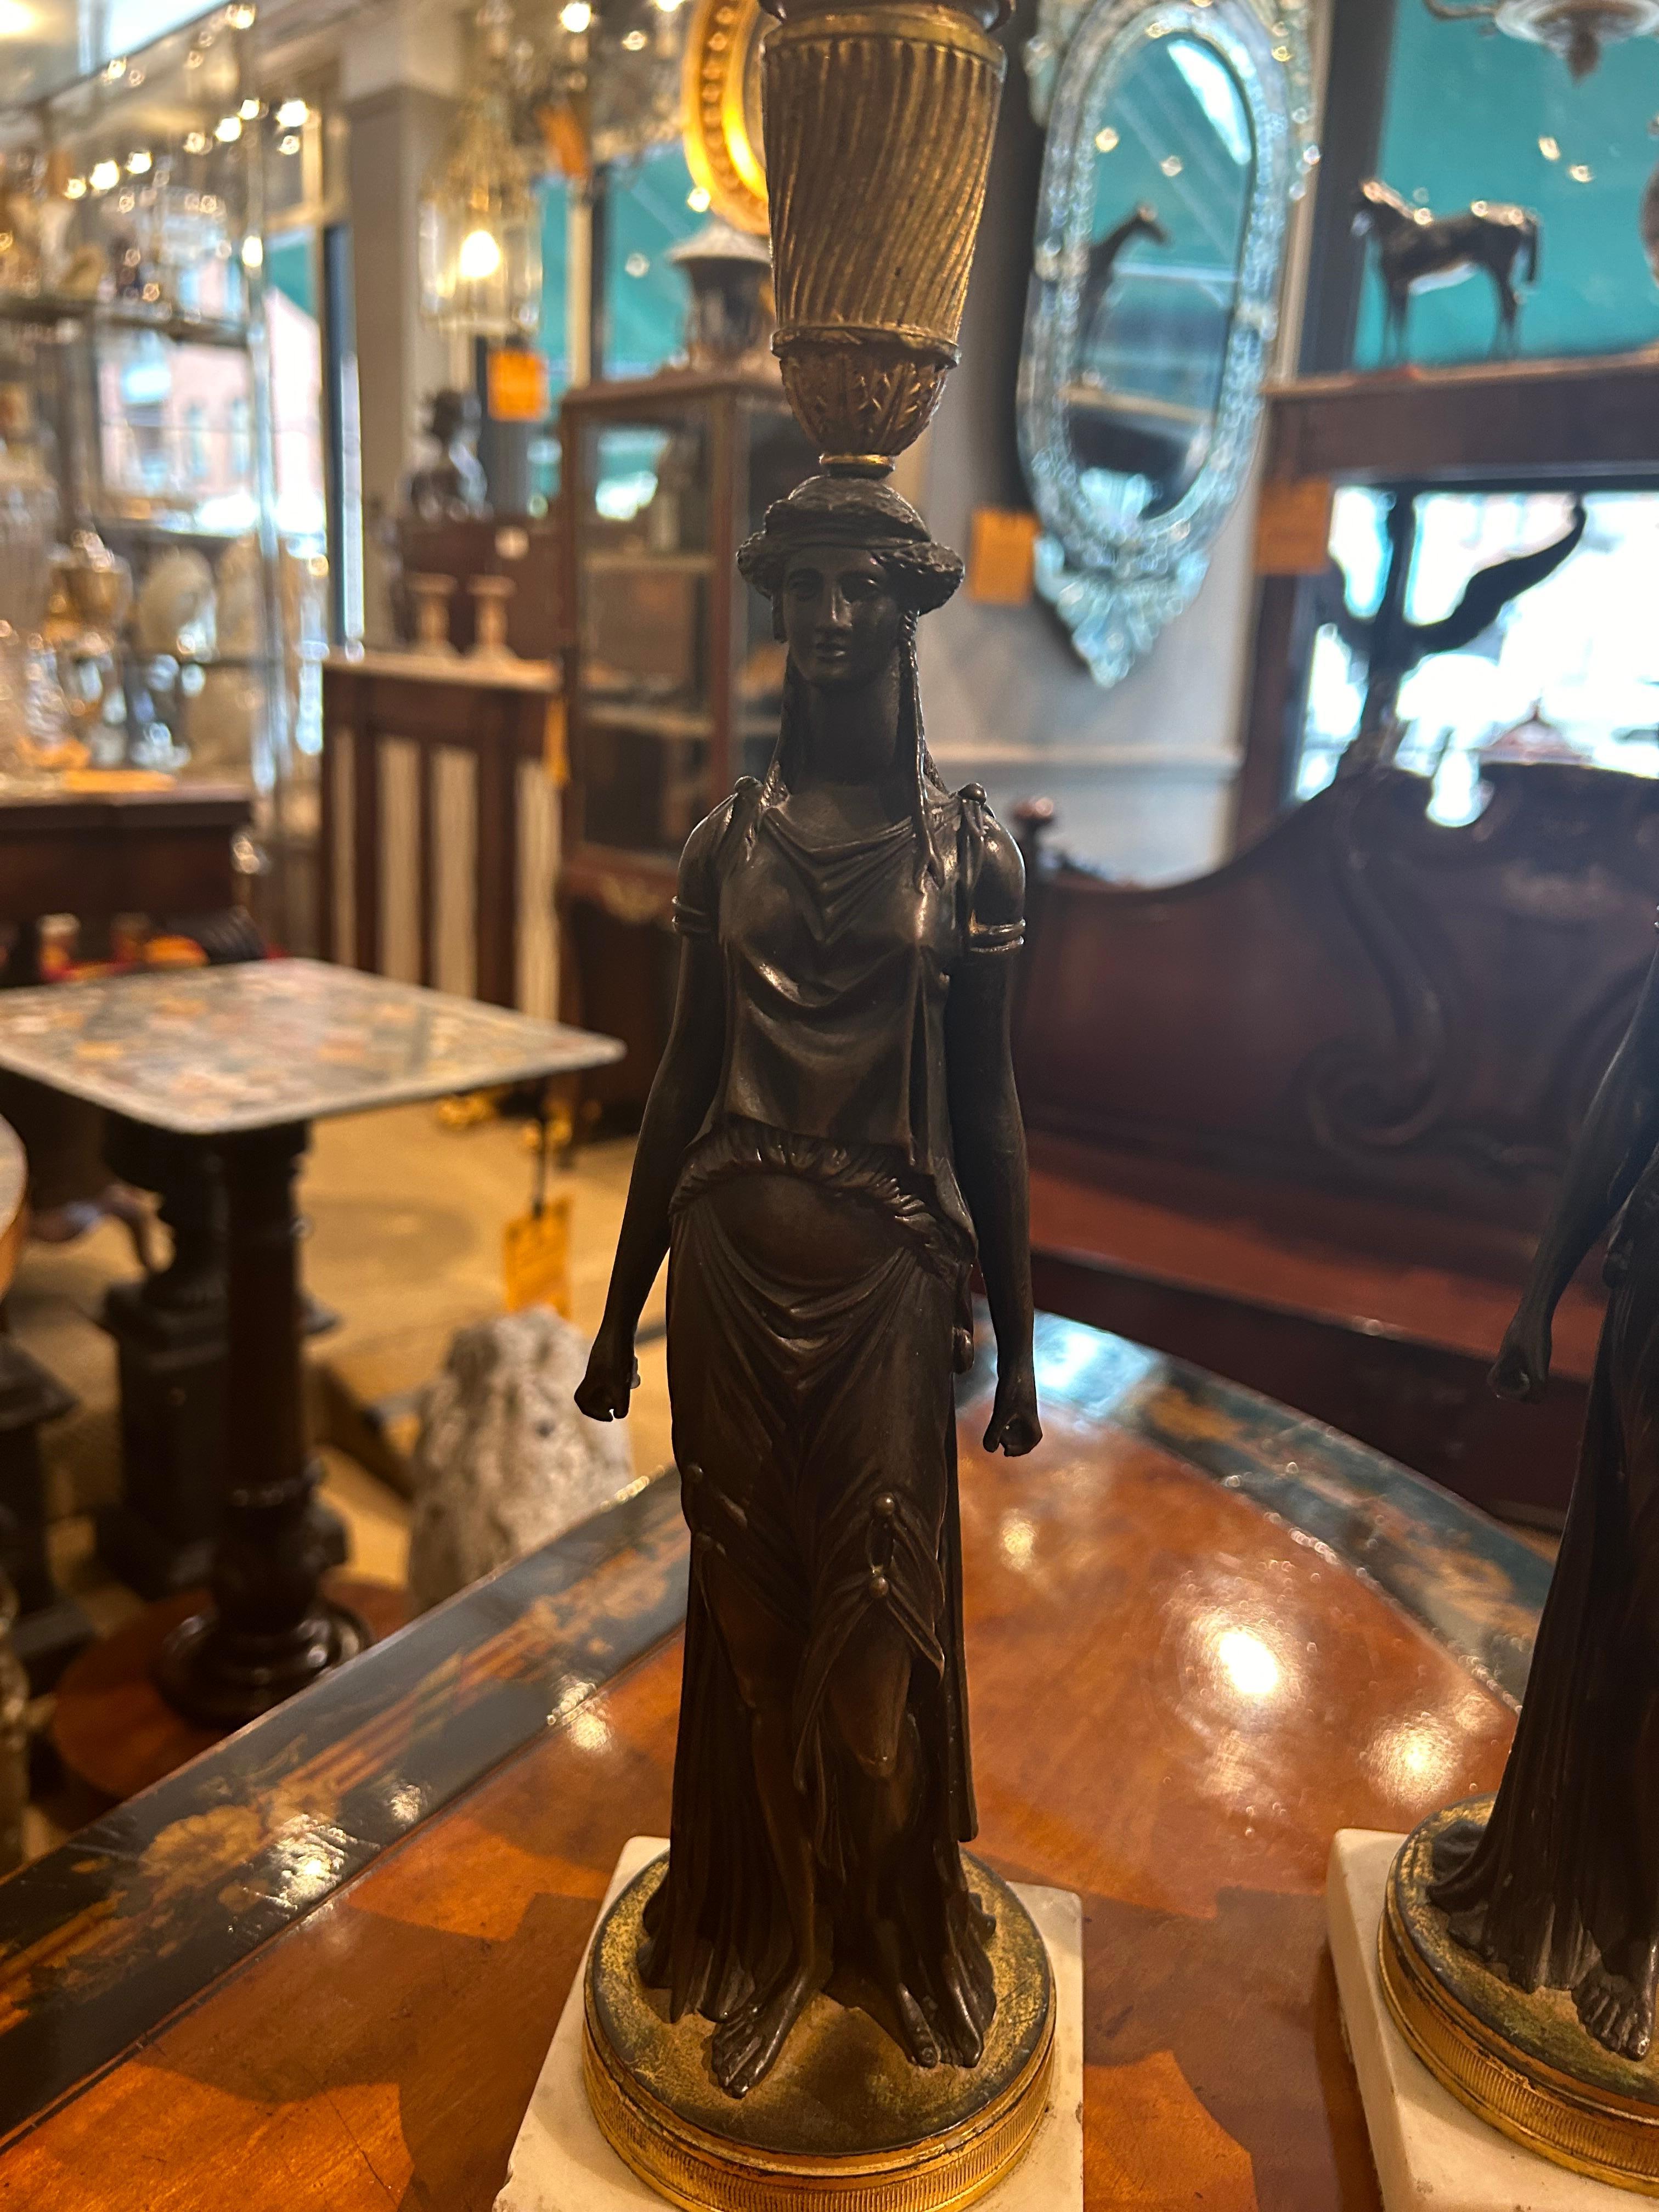 Pair 19th Century Regency bronze candlesticks with ormolu detail in the manner of William Kent. The pair depict two female figures in Grecian dress, likely water carriers. They sit on white squared marble bases. Circa 1810.